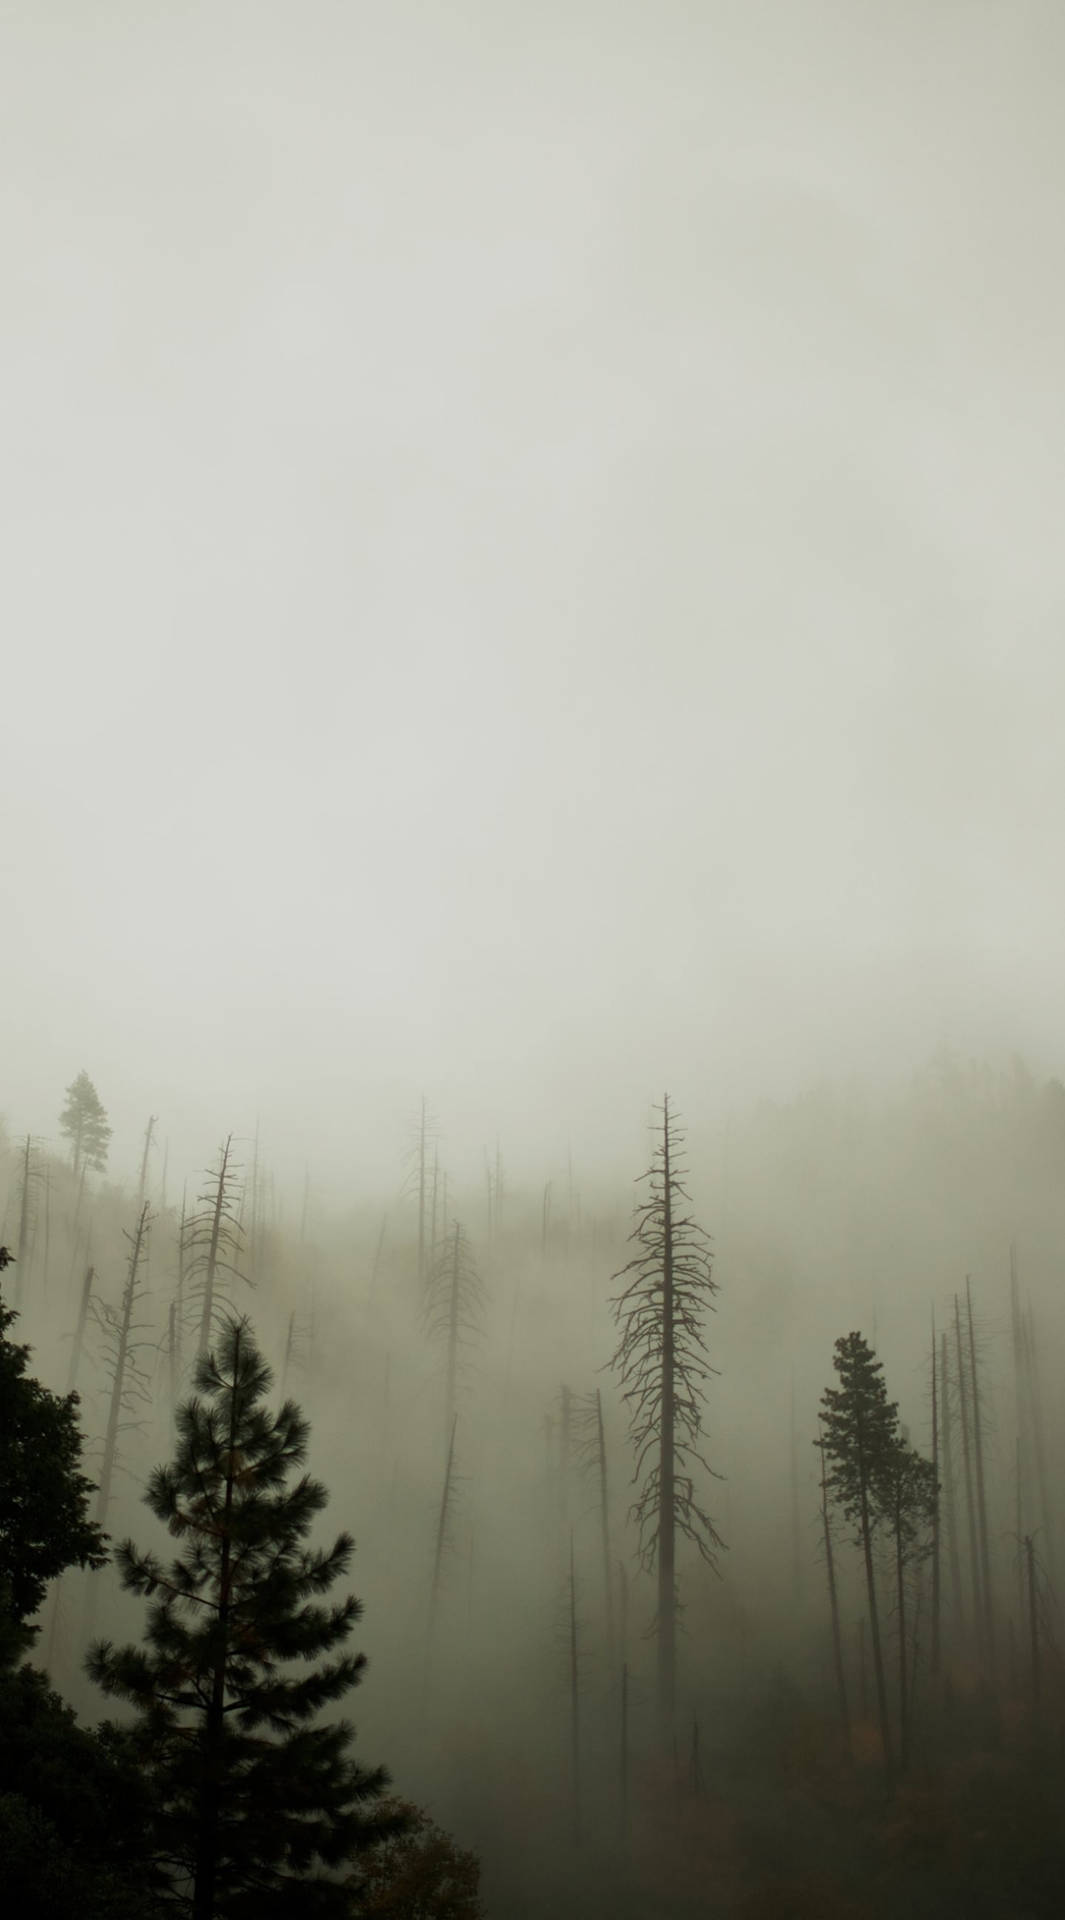 Enthralling Darkness Of The Misty Forest On Your Iphone Background